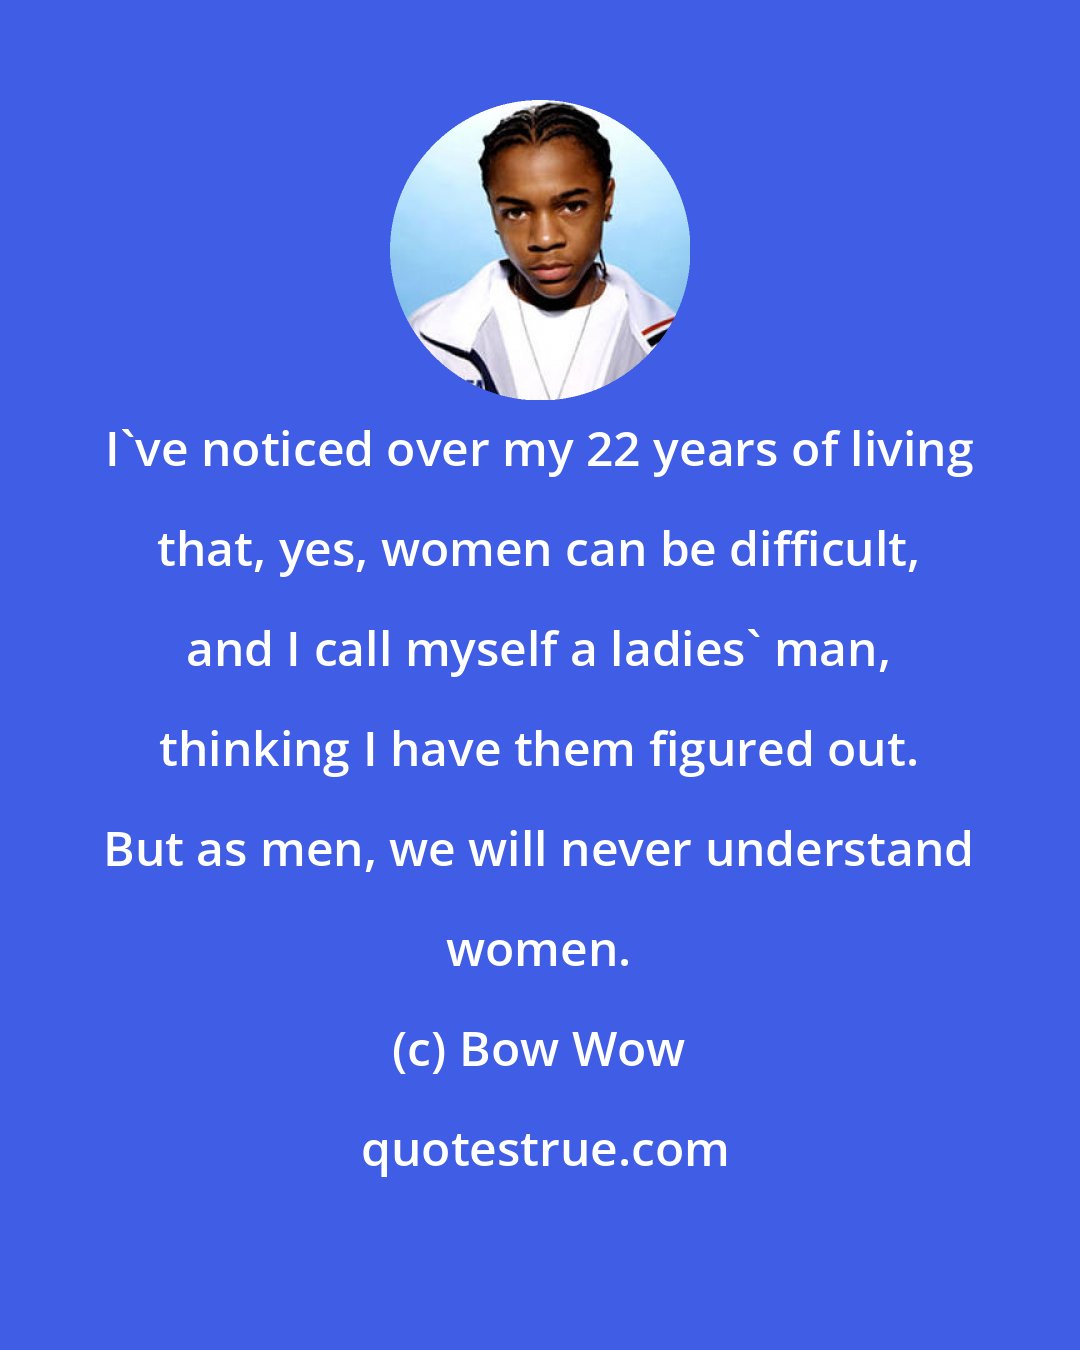 Bow Wow: I've noticed over my 22 years of living that, yes, women can be difficult, and I call myself a ladies' man, thinking I have them figured out. But as men, we will never understand women.